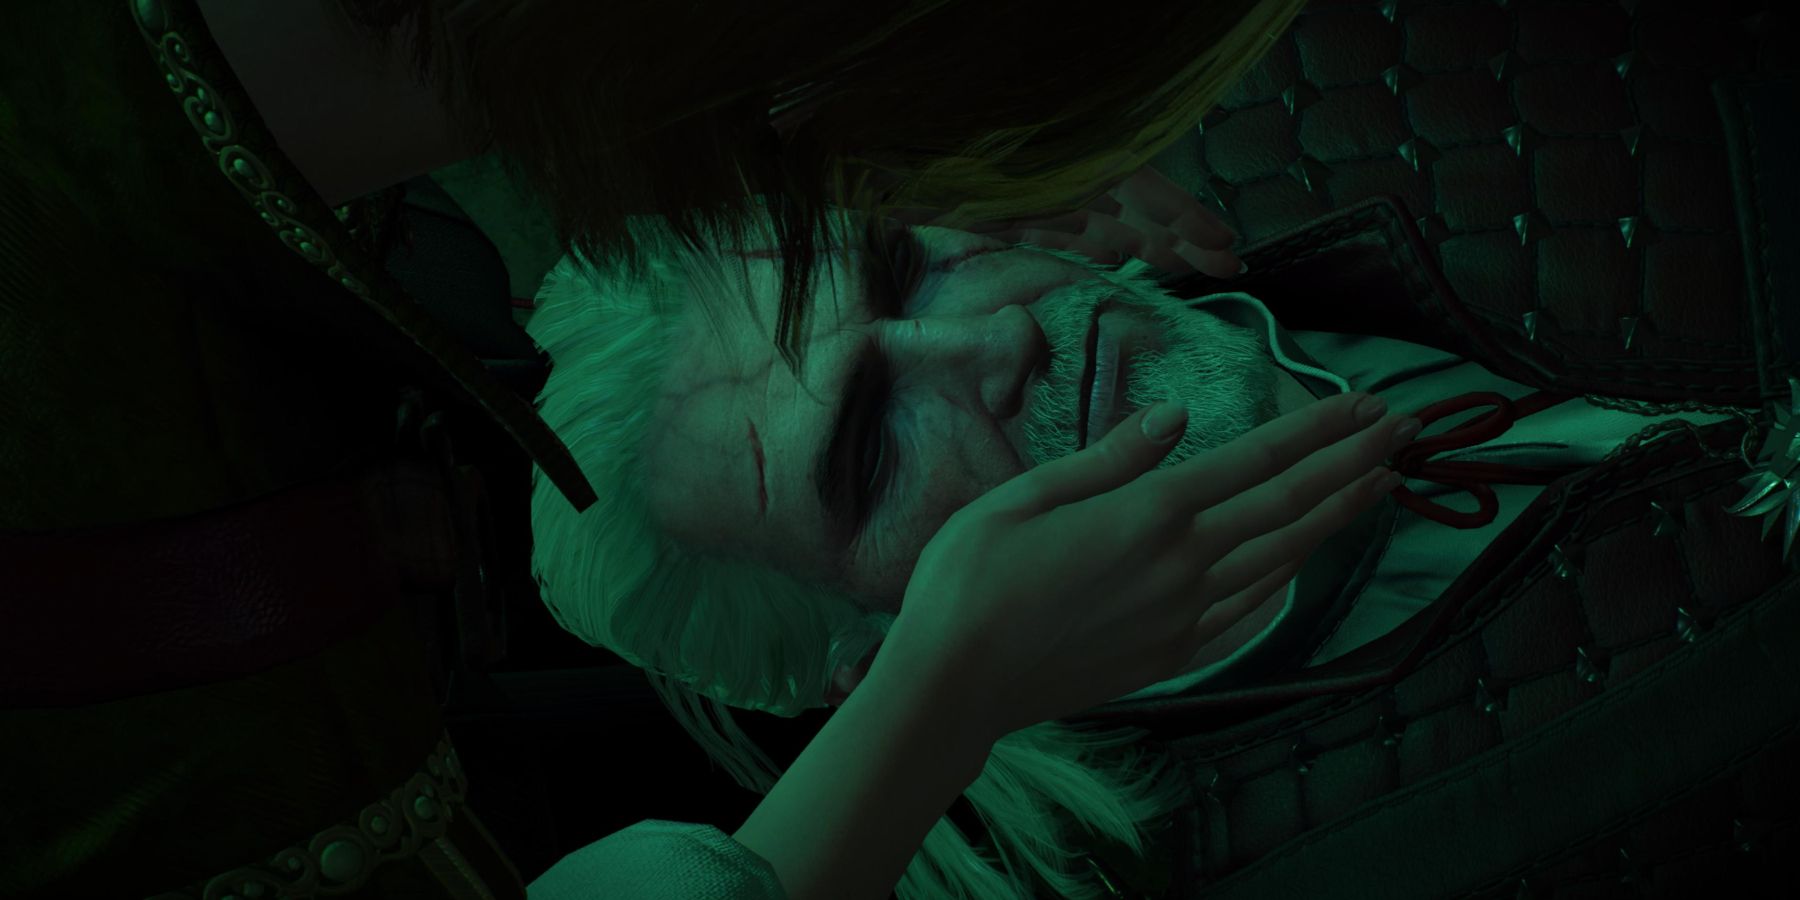 Witcher 3 - Vlodimir as Geralt waking up on Shani's lap